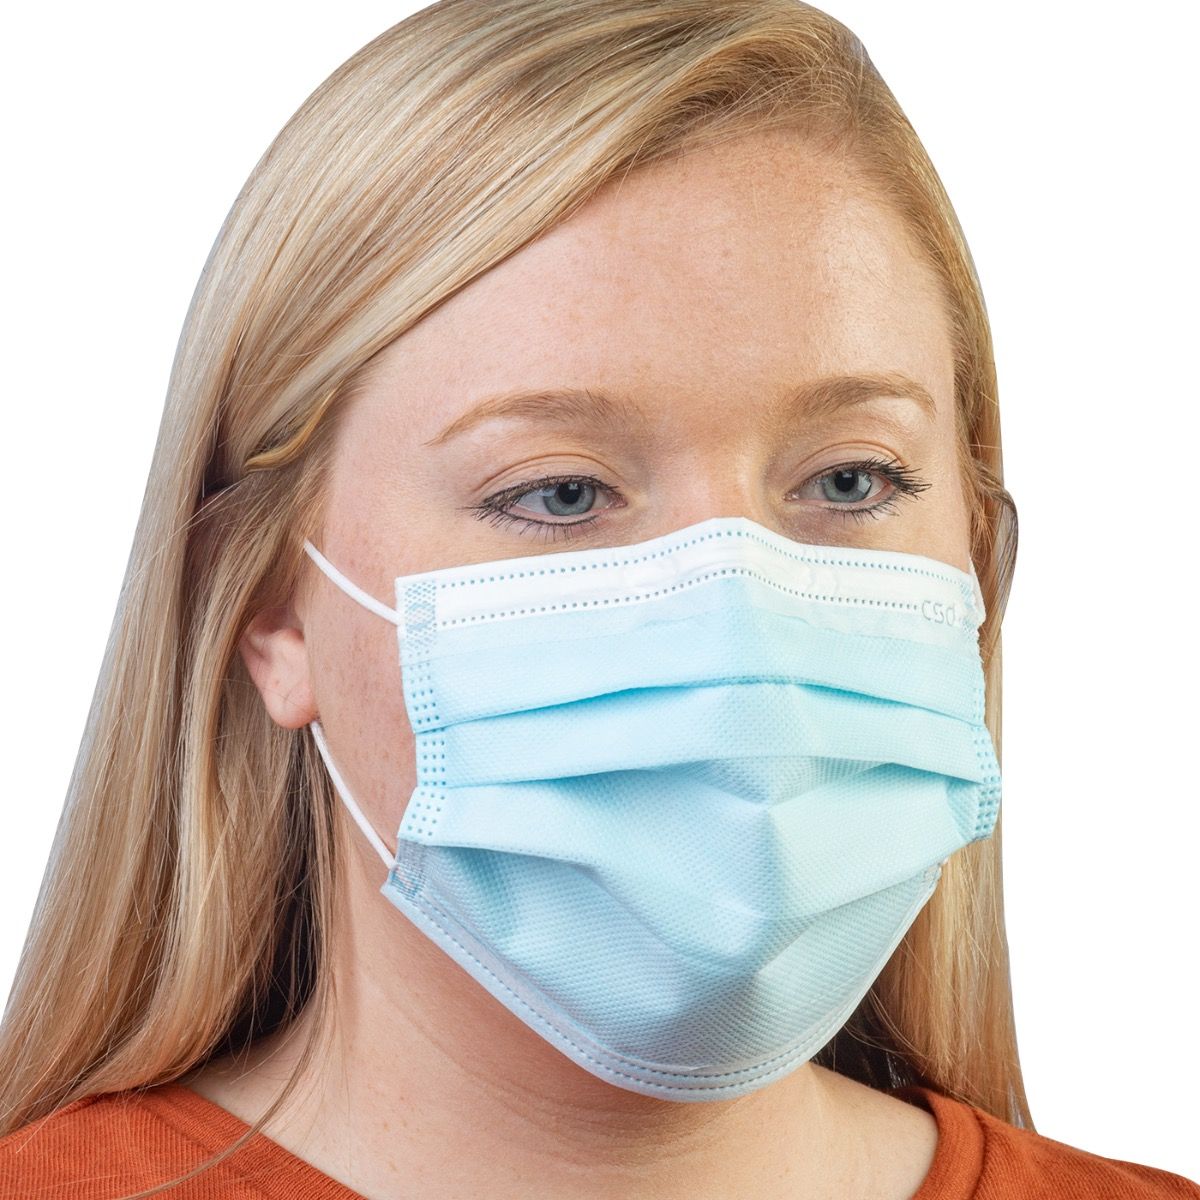 DISPOSABLE SURGICAL MASK - LEVEL 3 (BOX OF 50)